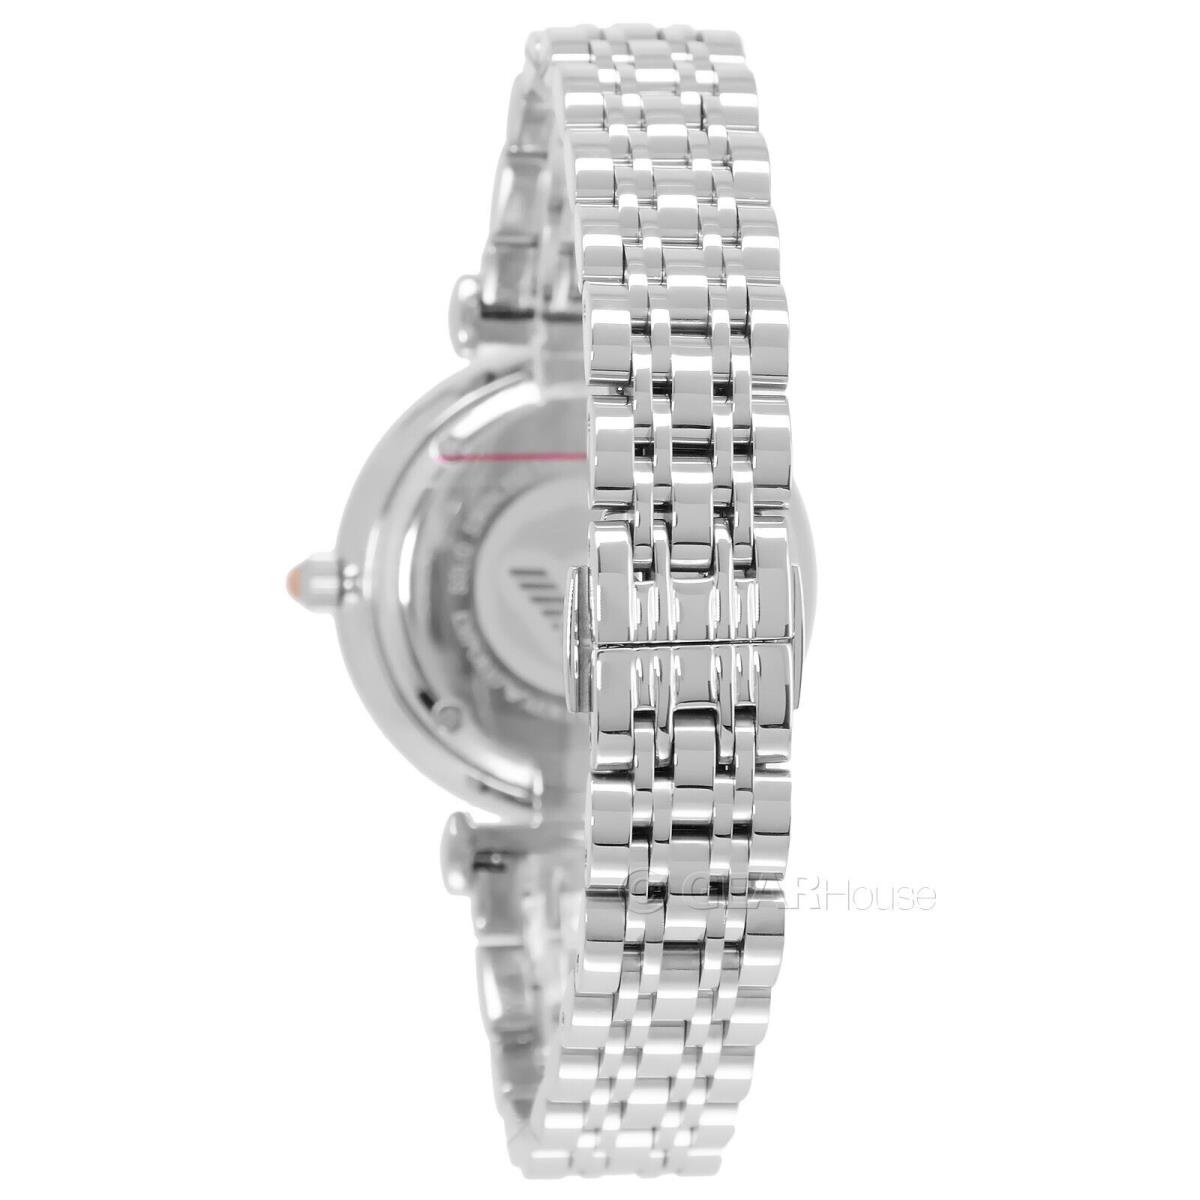 Emporio Armani watch  - Pink Dial, Silver Band, Silver Bezel